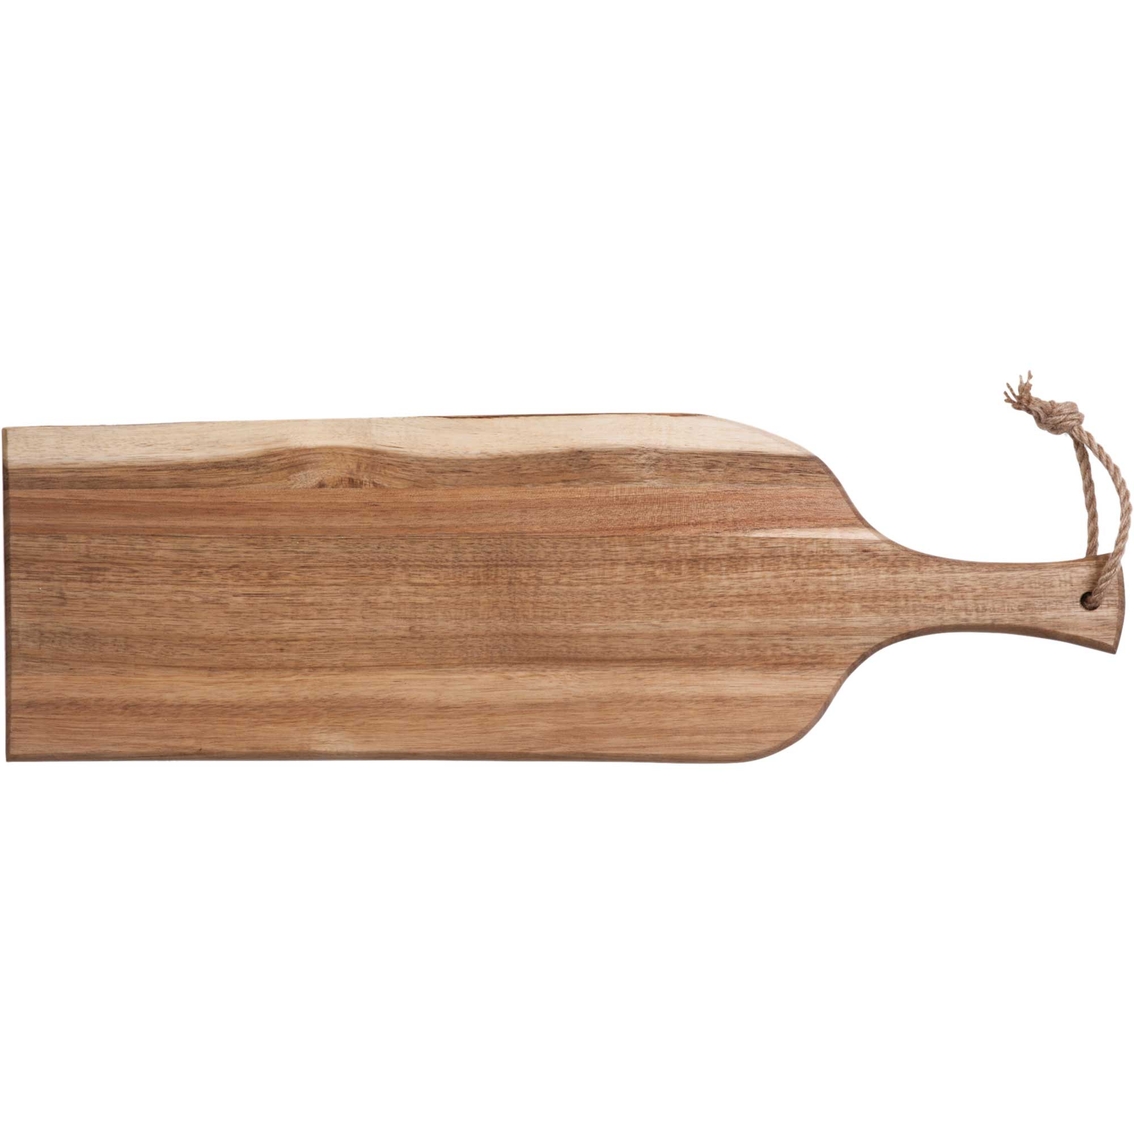 Picnic Time Artisan 24 in. Acacia Serving Plank - Image 2 of 10